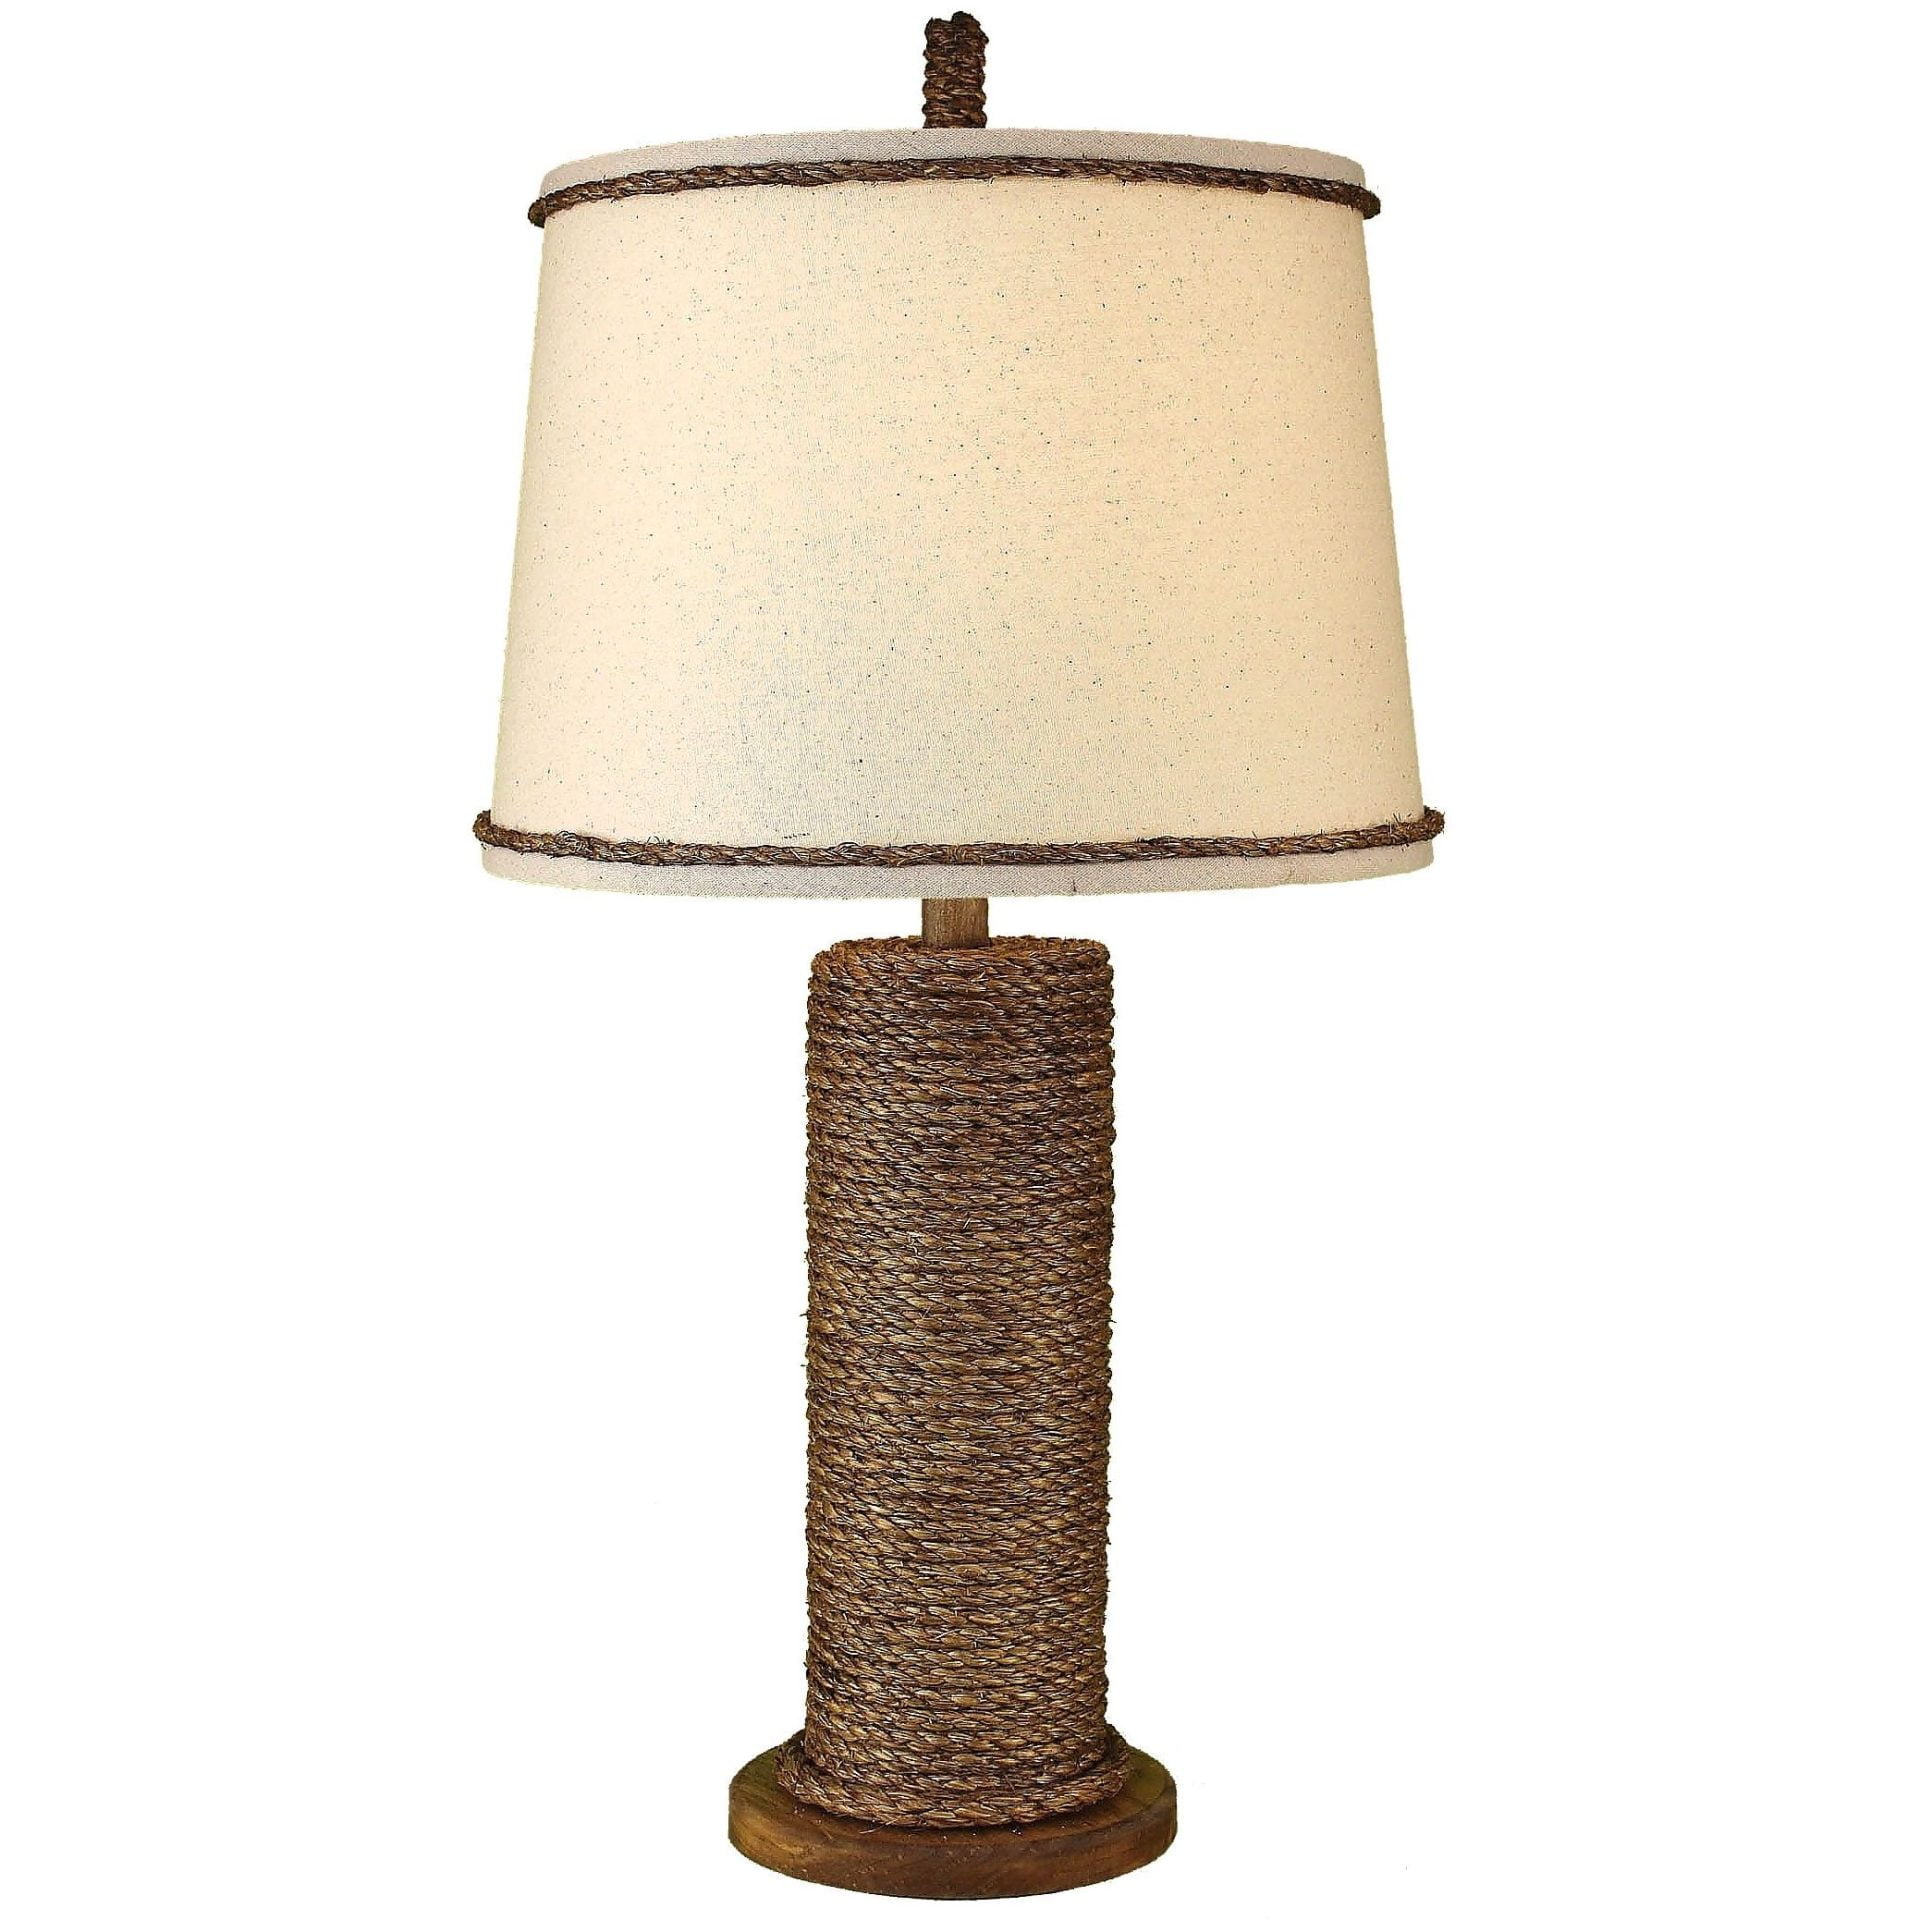 Rope Table Lamp with Spindle